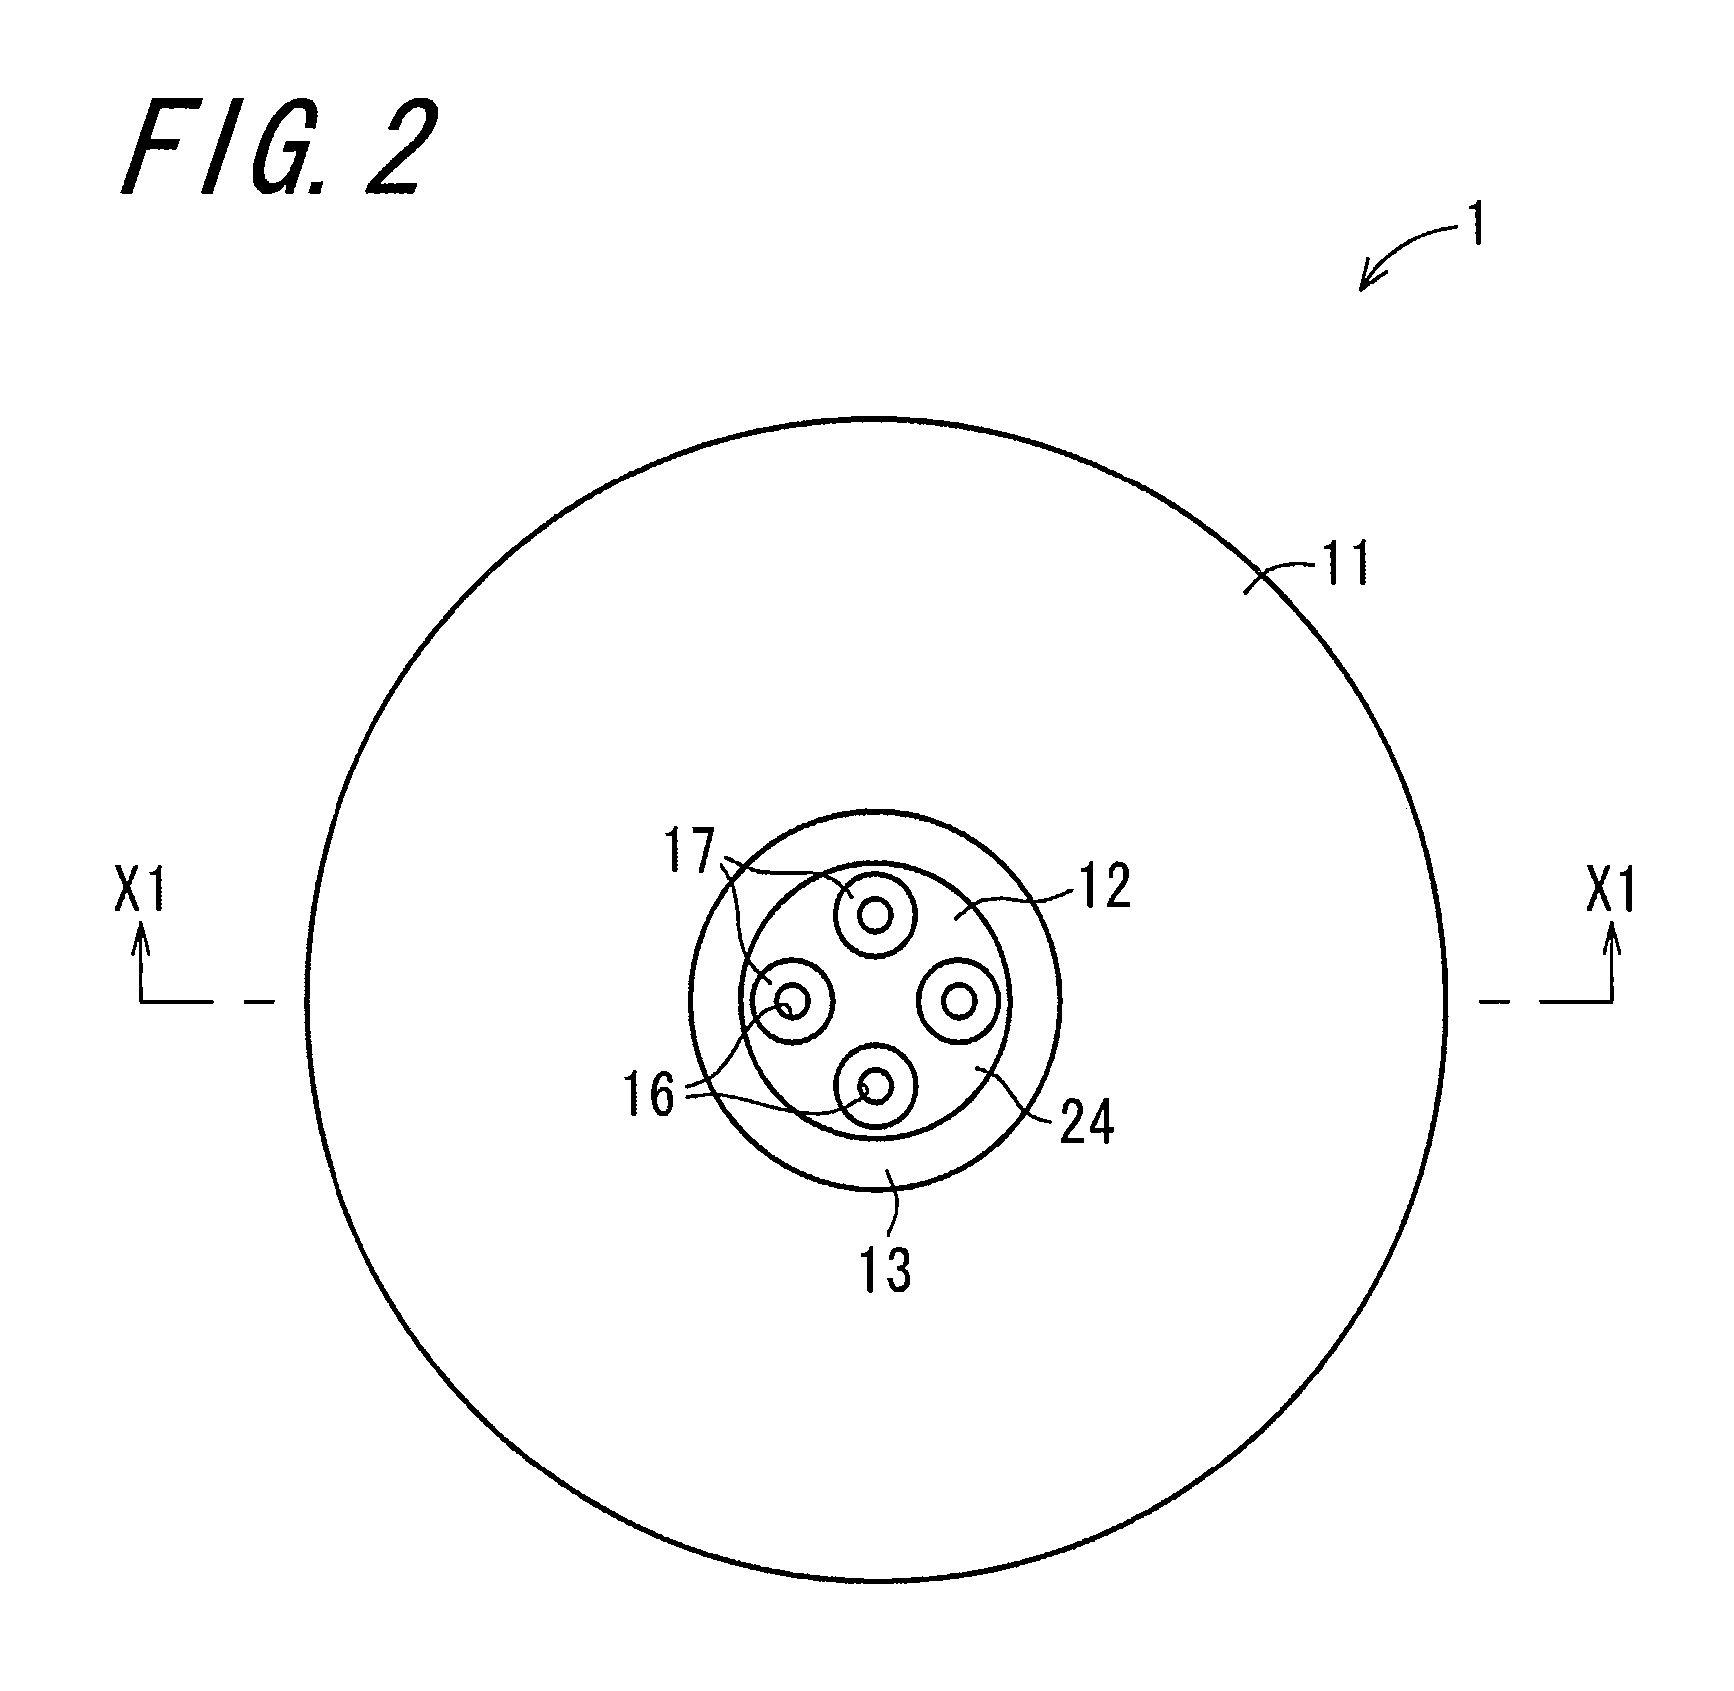 Shell of pressure-resistant container, pressure-resistant container, and exploratory apparatus